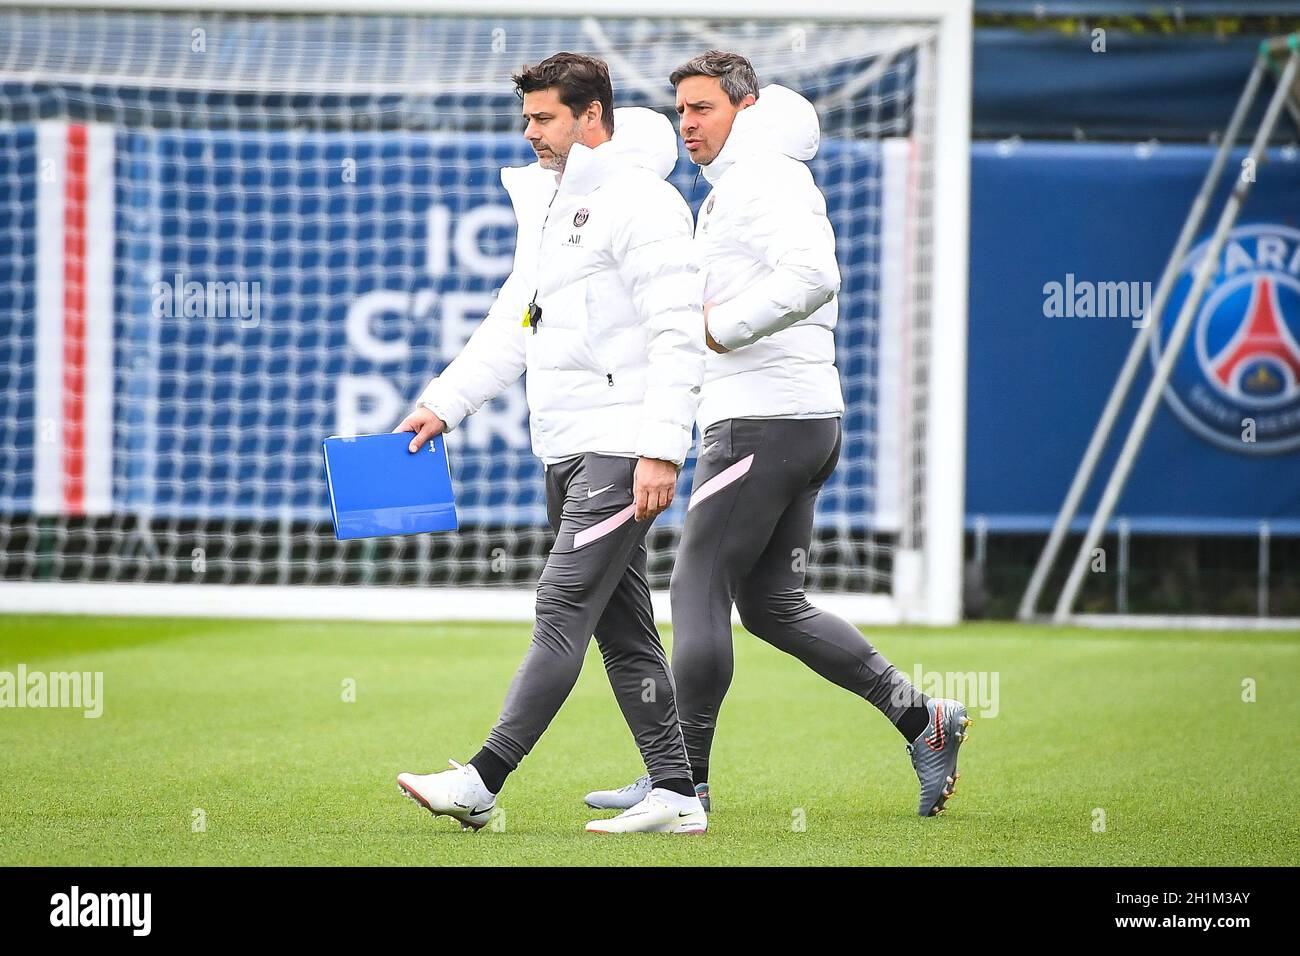 Saint-Germain-en-Laye, France, October 18, 2021, Miguel D'AGOSTINO of PSG  and Mauricio POCHETTINO of PSG during the training of the Paris Saint- Germain team on October 18, 2021 at Camp des Loges in Saint-Germain-en-Laye,